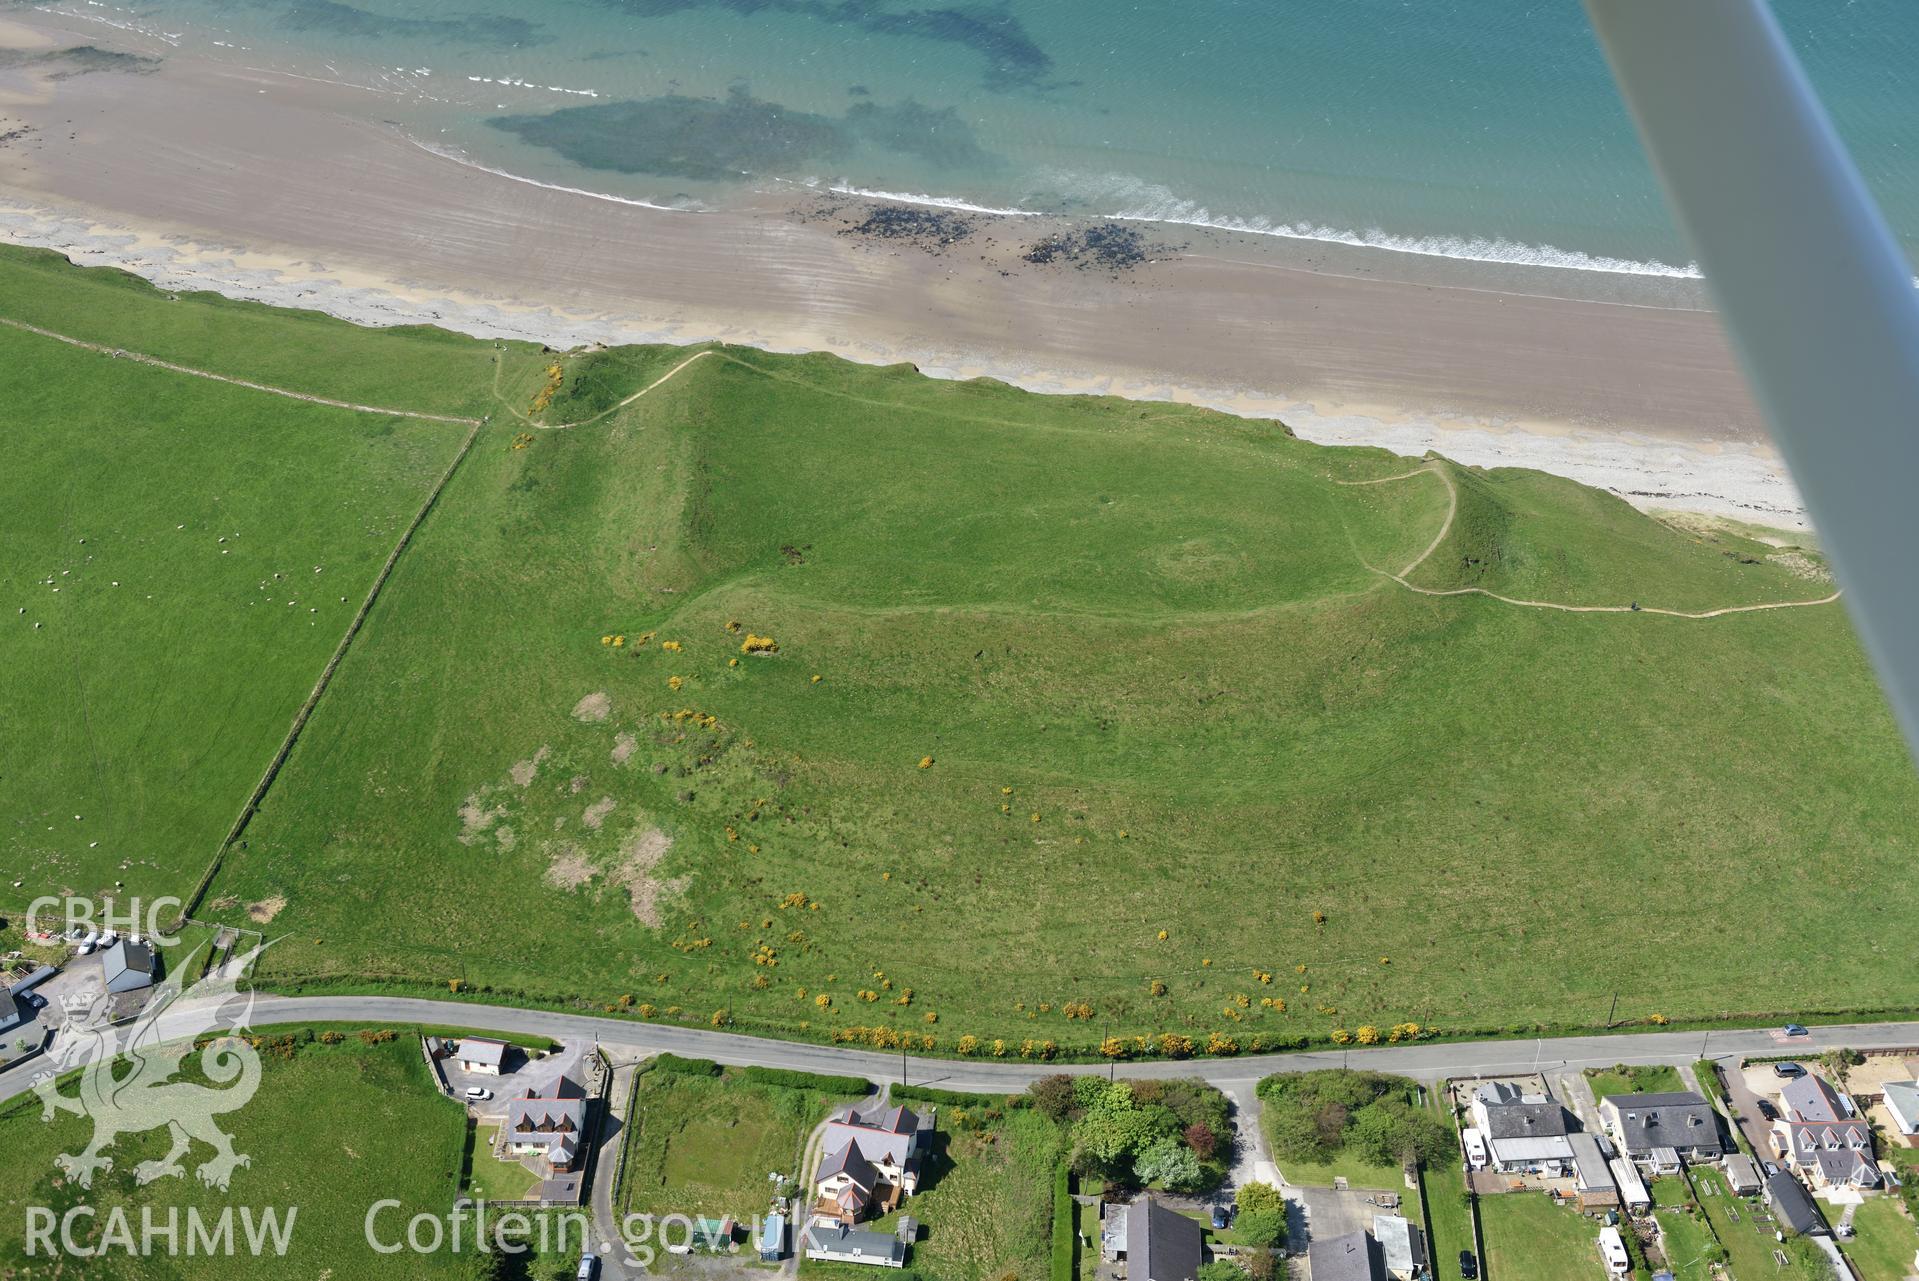 Aerial photography of Dinas Dinlle taken on 3rd May 2017.  Baseline aerial reconnaissance survey for the CHERISH Project. ? Crown: CHERISH PROJECT 2017. Produced with EU funds through the Ireland Wales Co-operation Programme 2014-2020. All material made